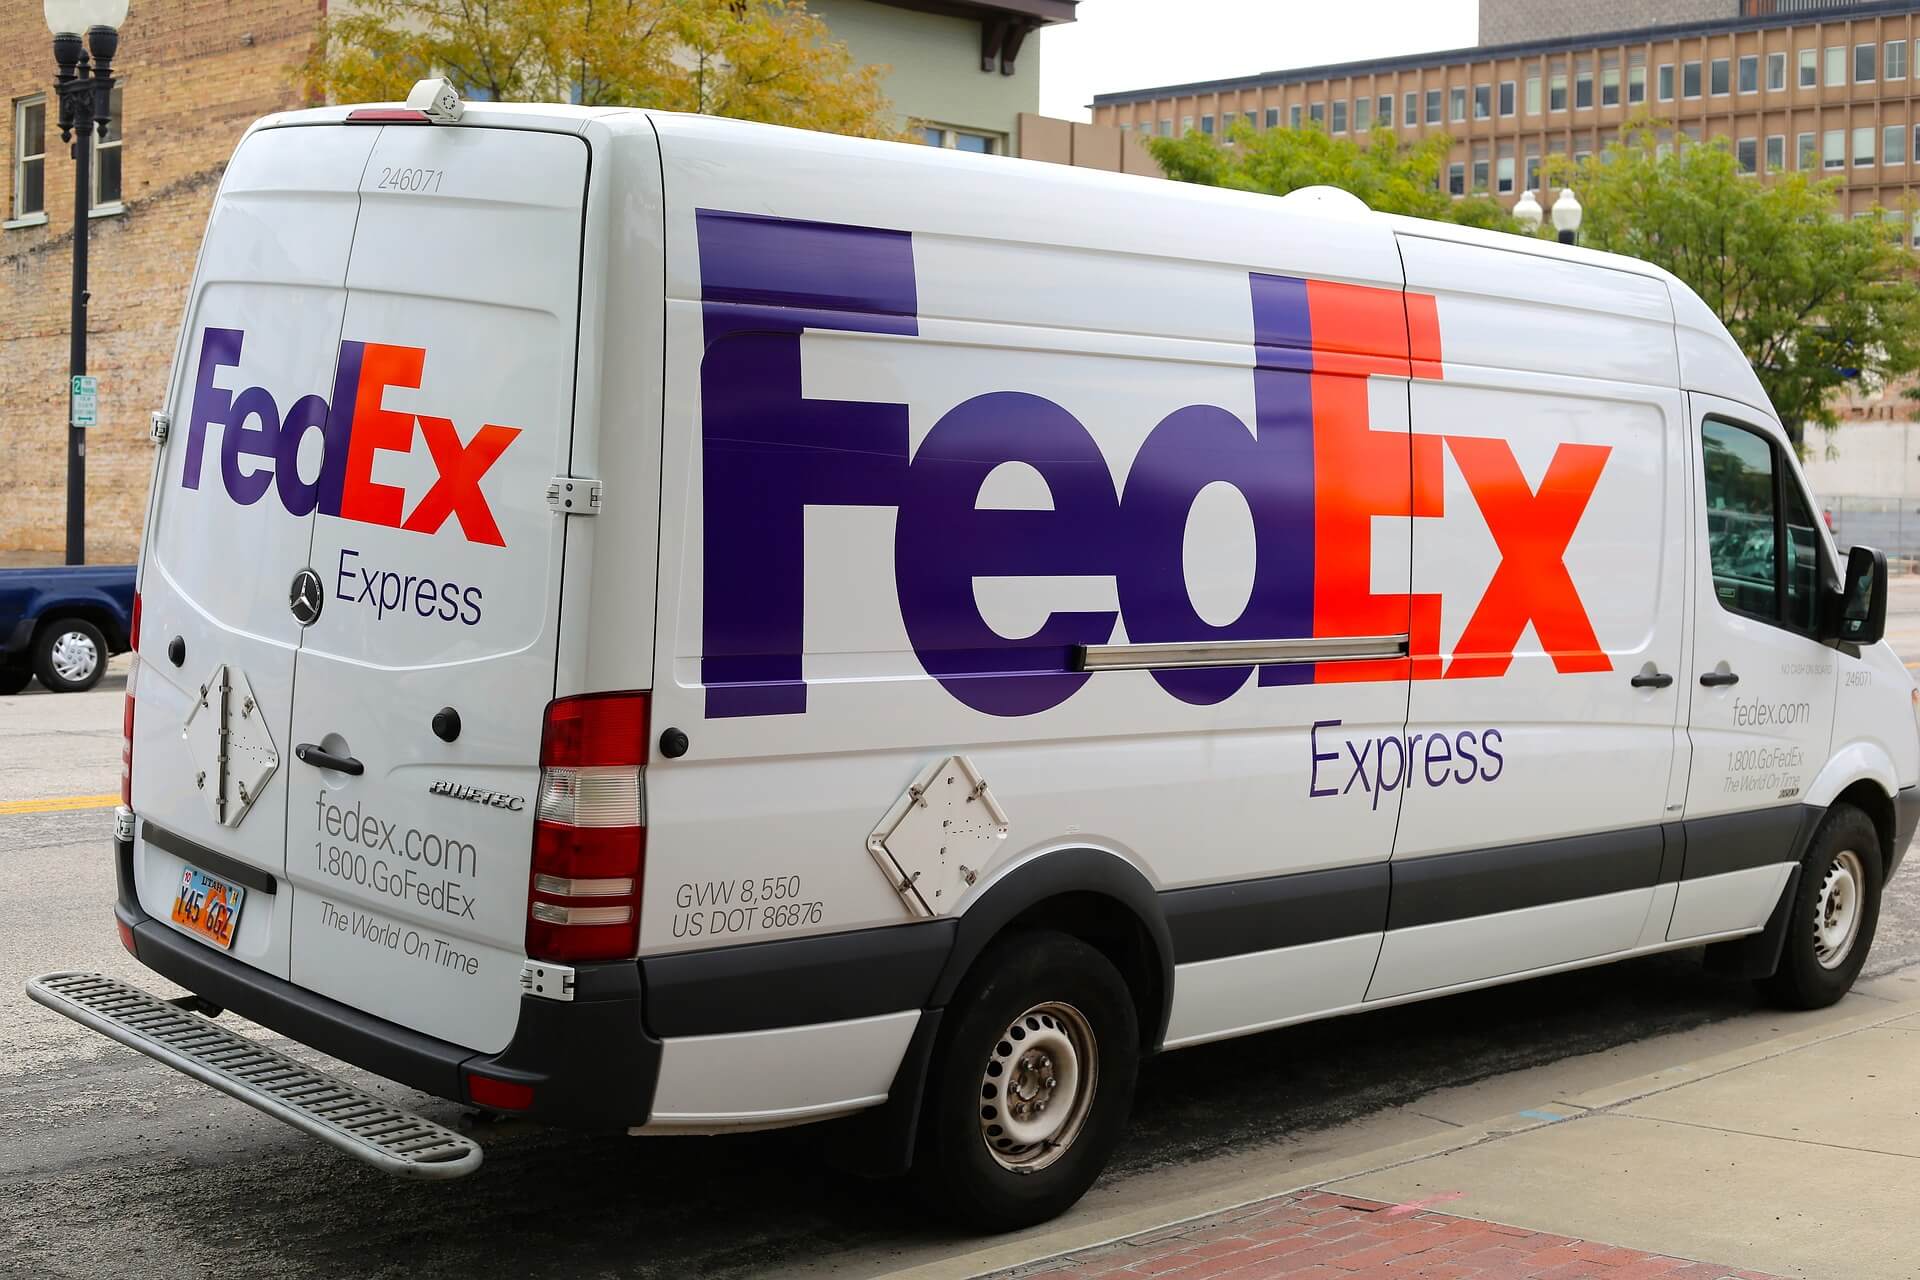 Reduce the Cost of FedEx with Digital Contracts